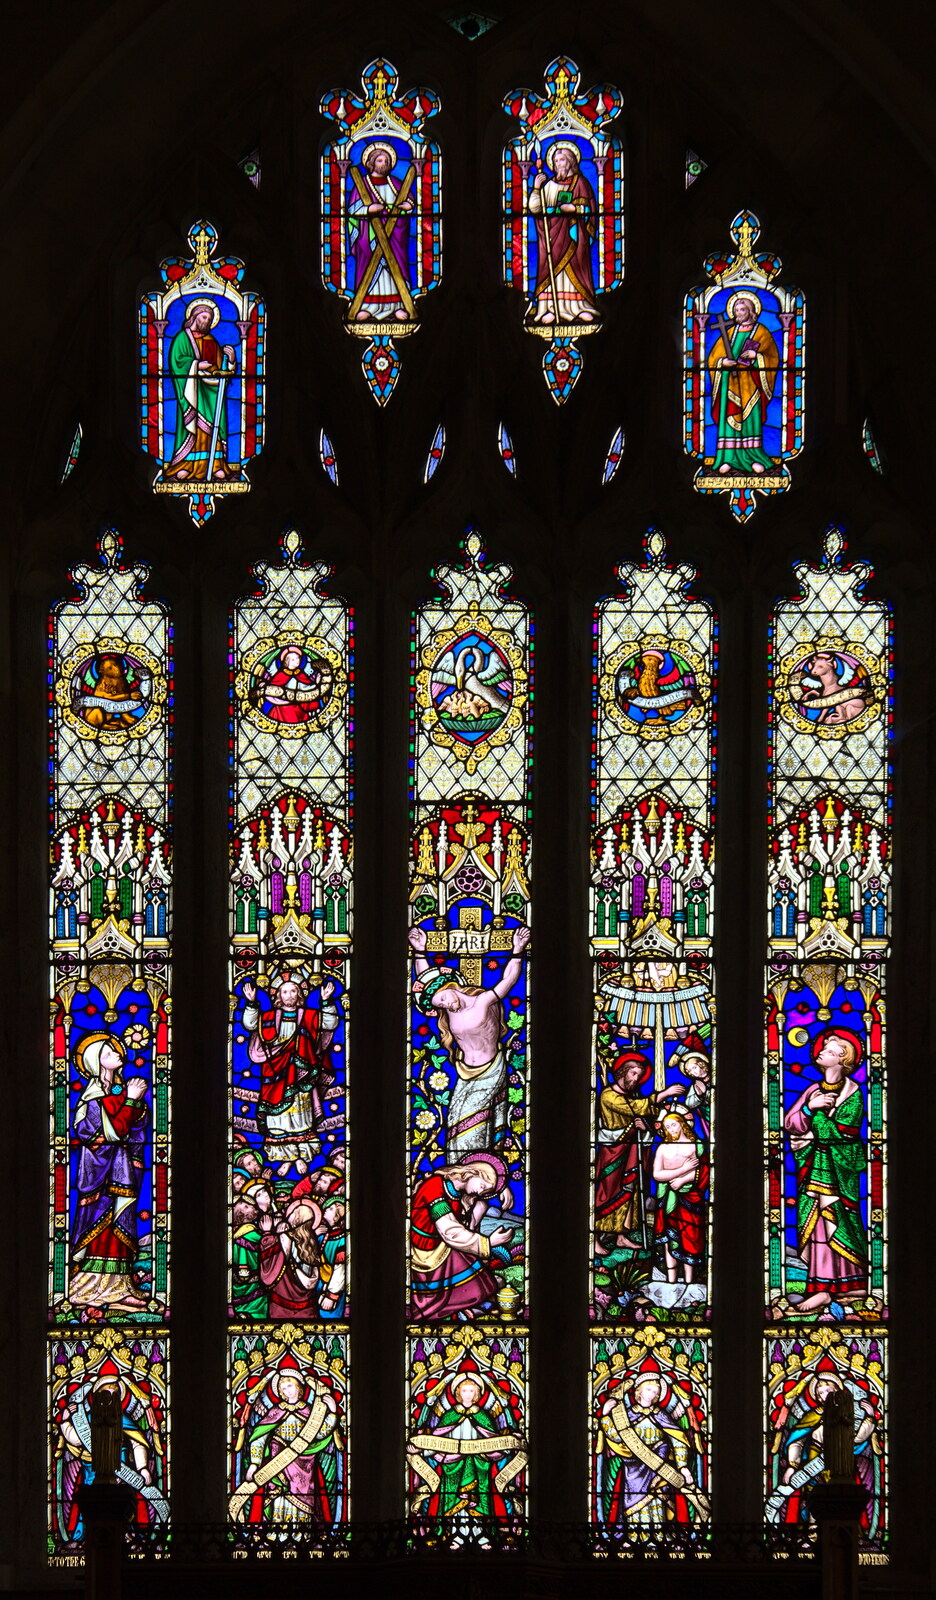 The nave window of St. Andrew's, Moretonhampstead from Easter in South Zeal and Moretonhampstead, Devon - 9th April